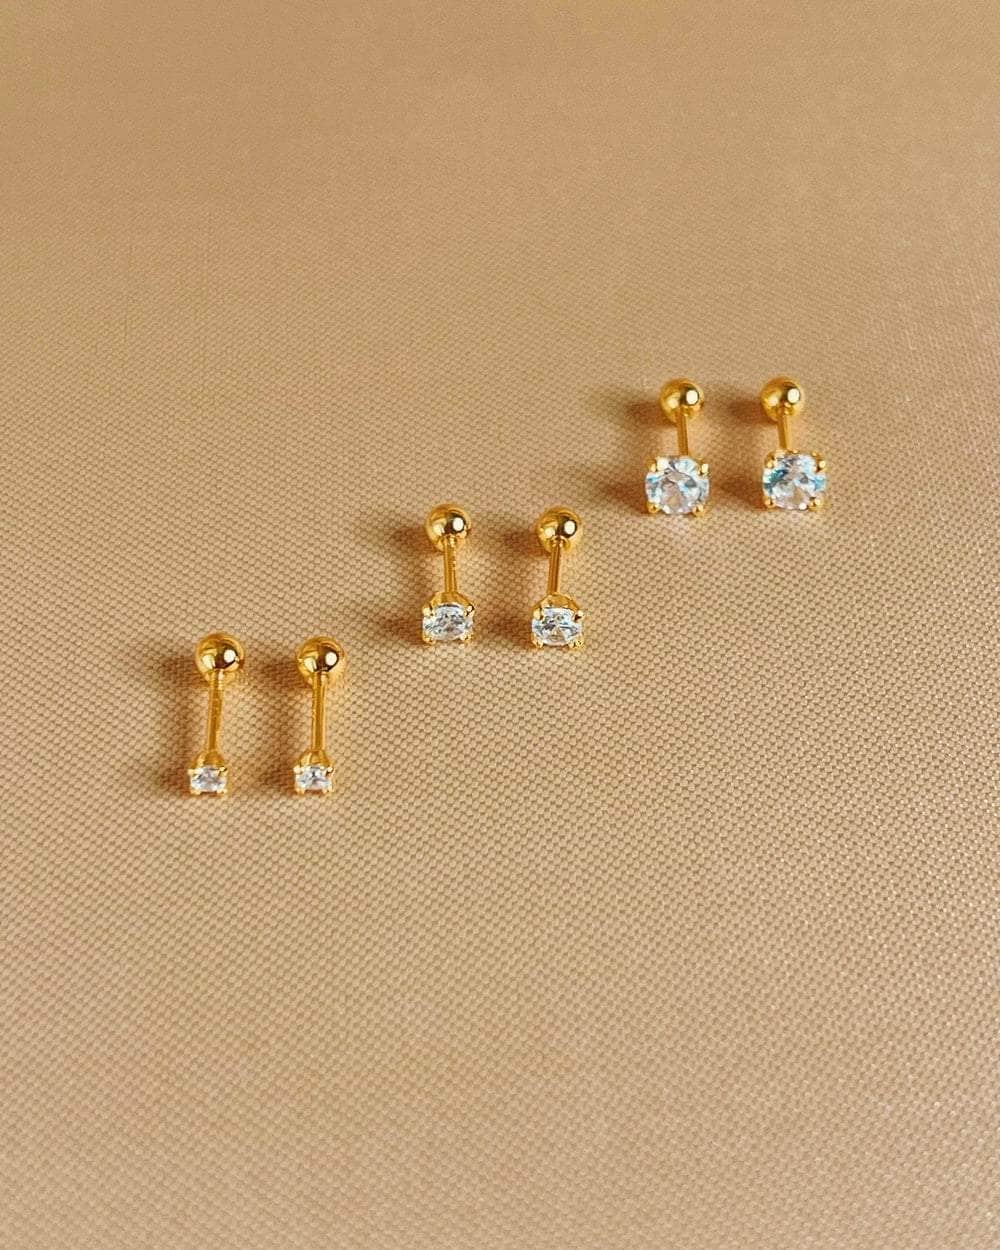 So Dainty Co. Studs Hayden Gold Studs (Choose 1 — 2mm / 3mm / 4mm) Gold Plated 925 Sterling Silver Jewelry